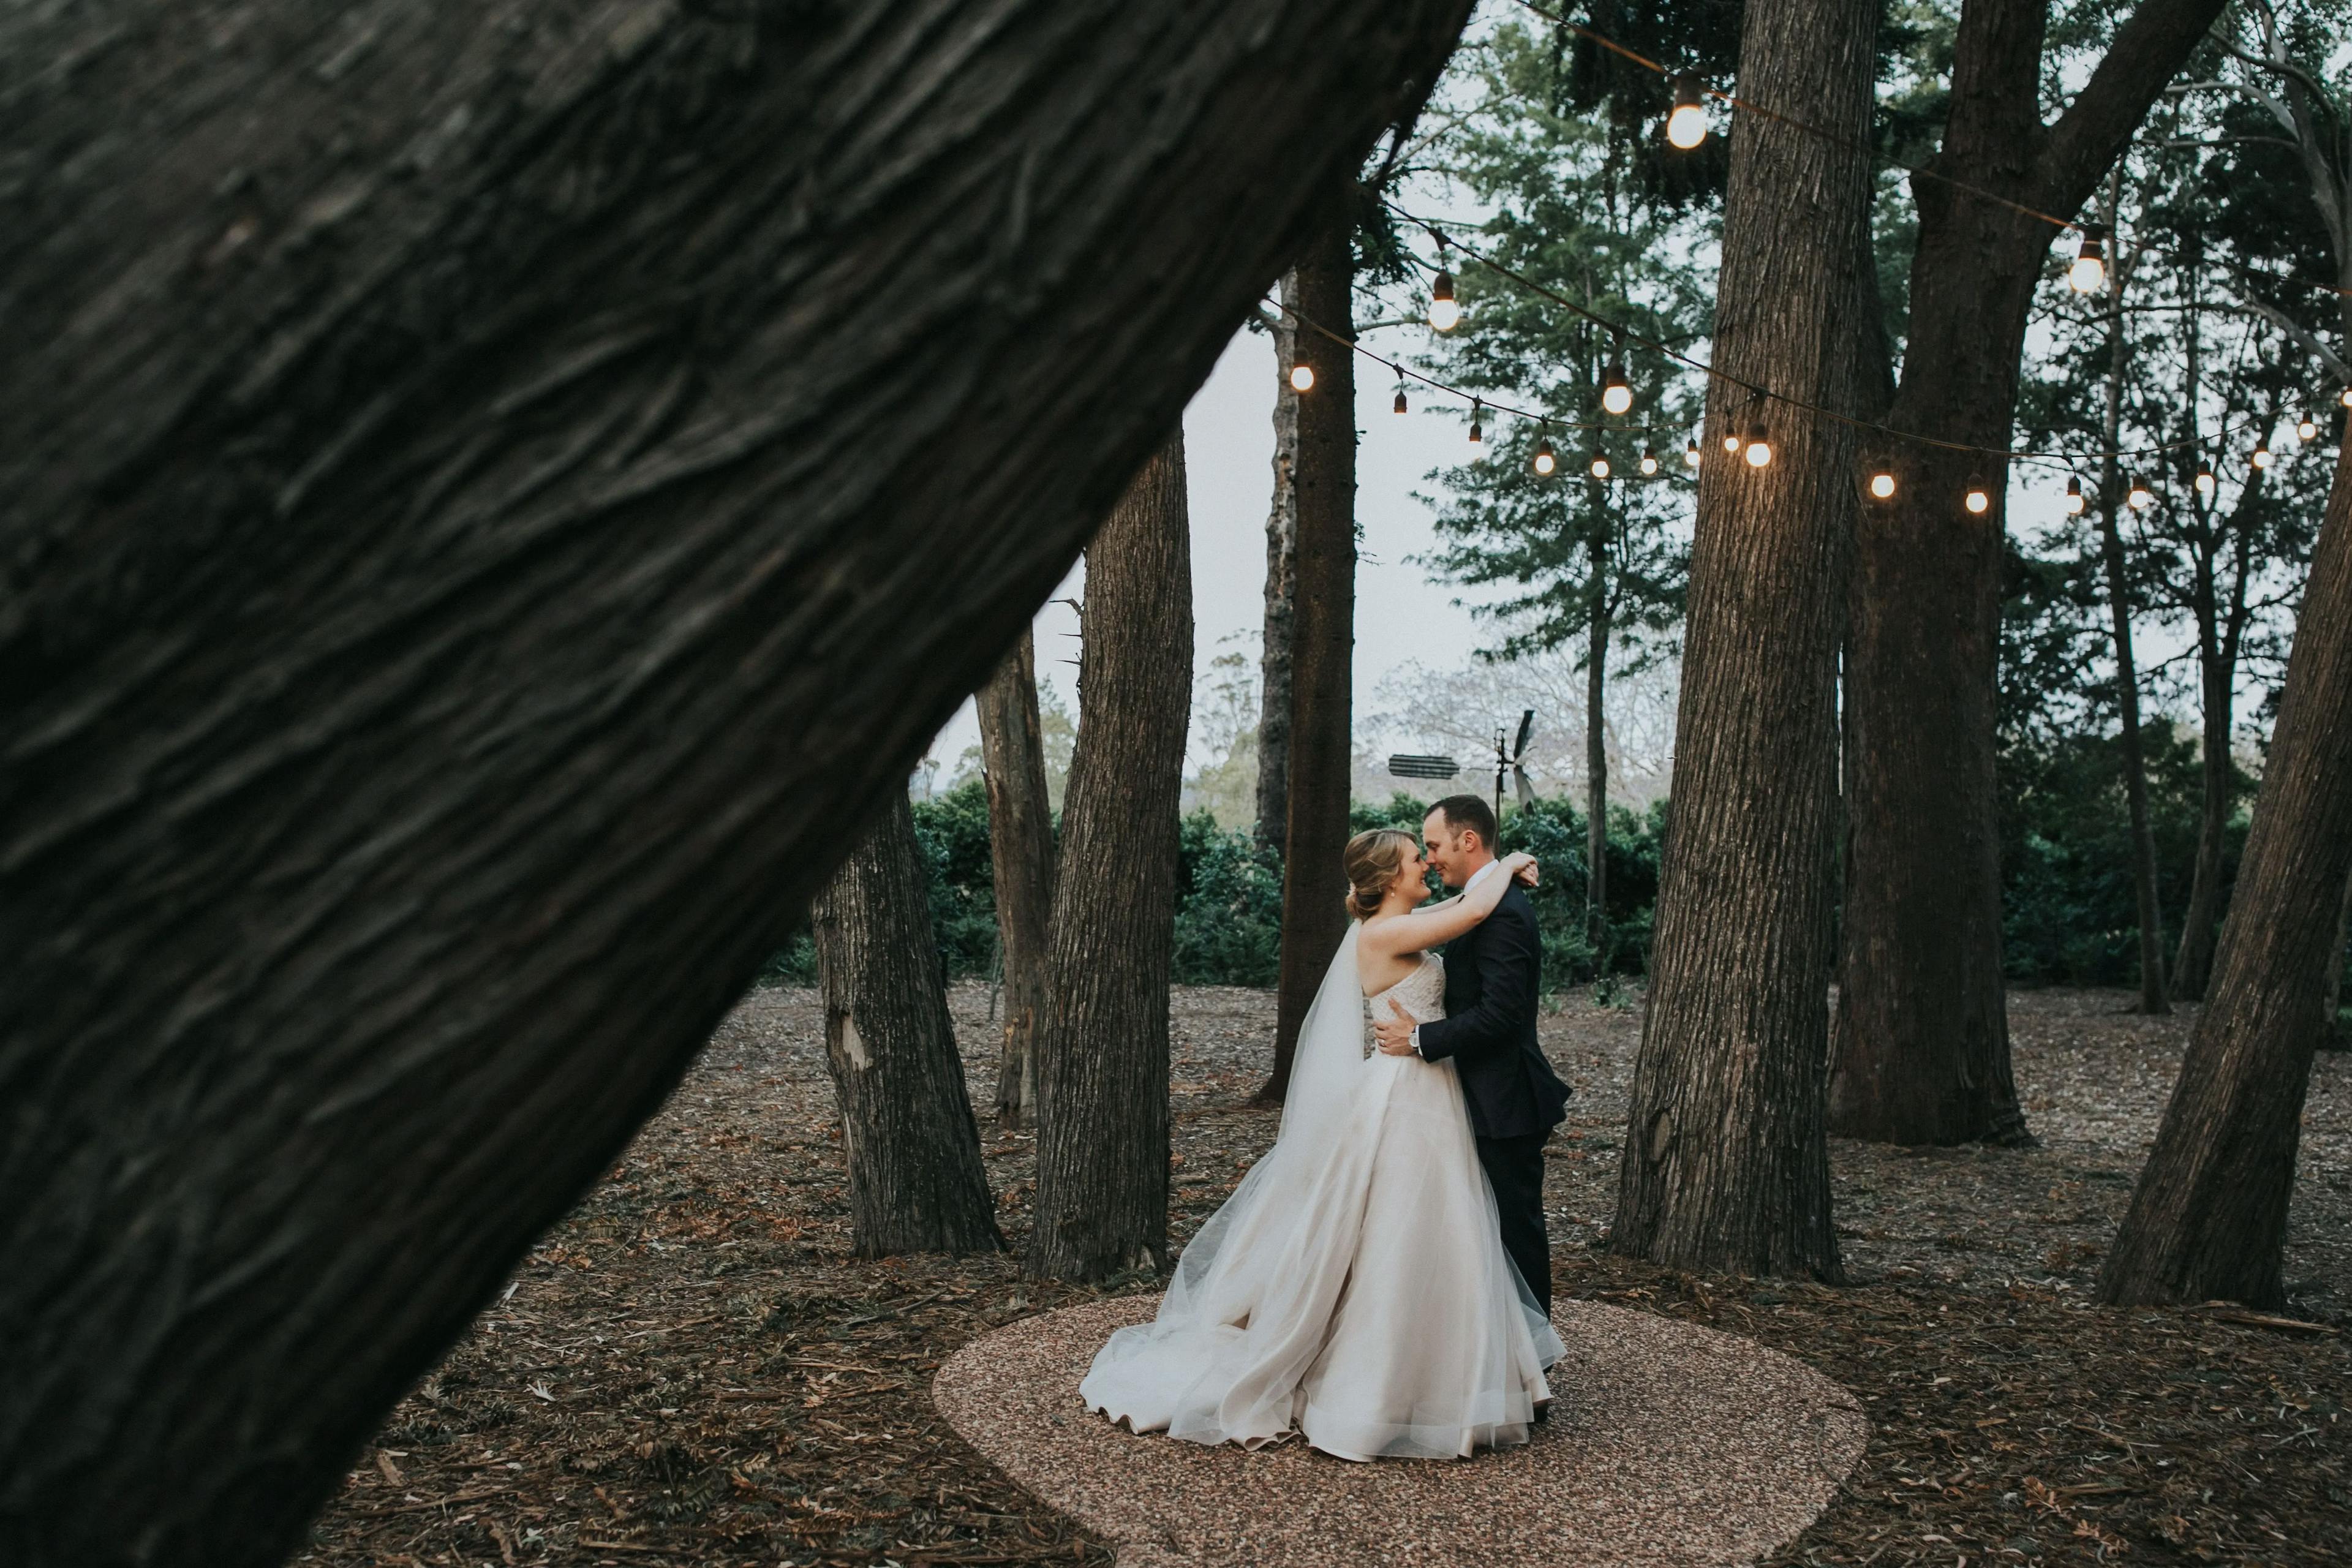 A bride and groom share a romantic embrace outdoors in a forested area. The couple stands on a circular path, framed by tree trunks, beneath string lights that hang above them, creating a magical atmosphere. The bride wears a flowing wedding dress, and the groom is in a suit.